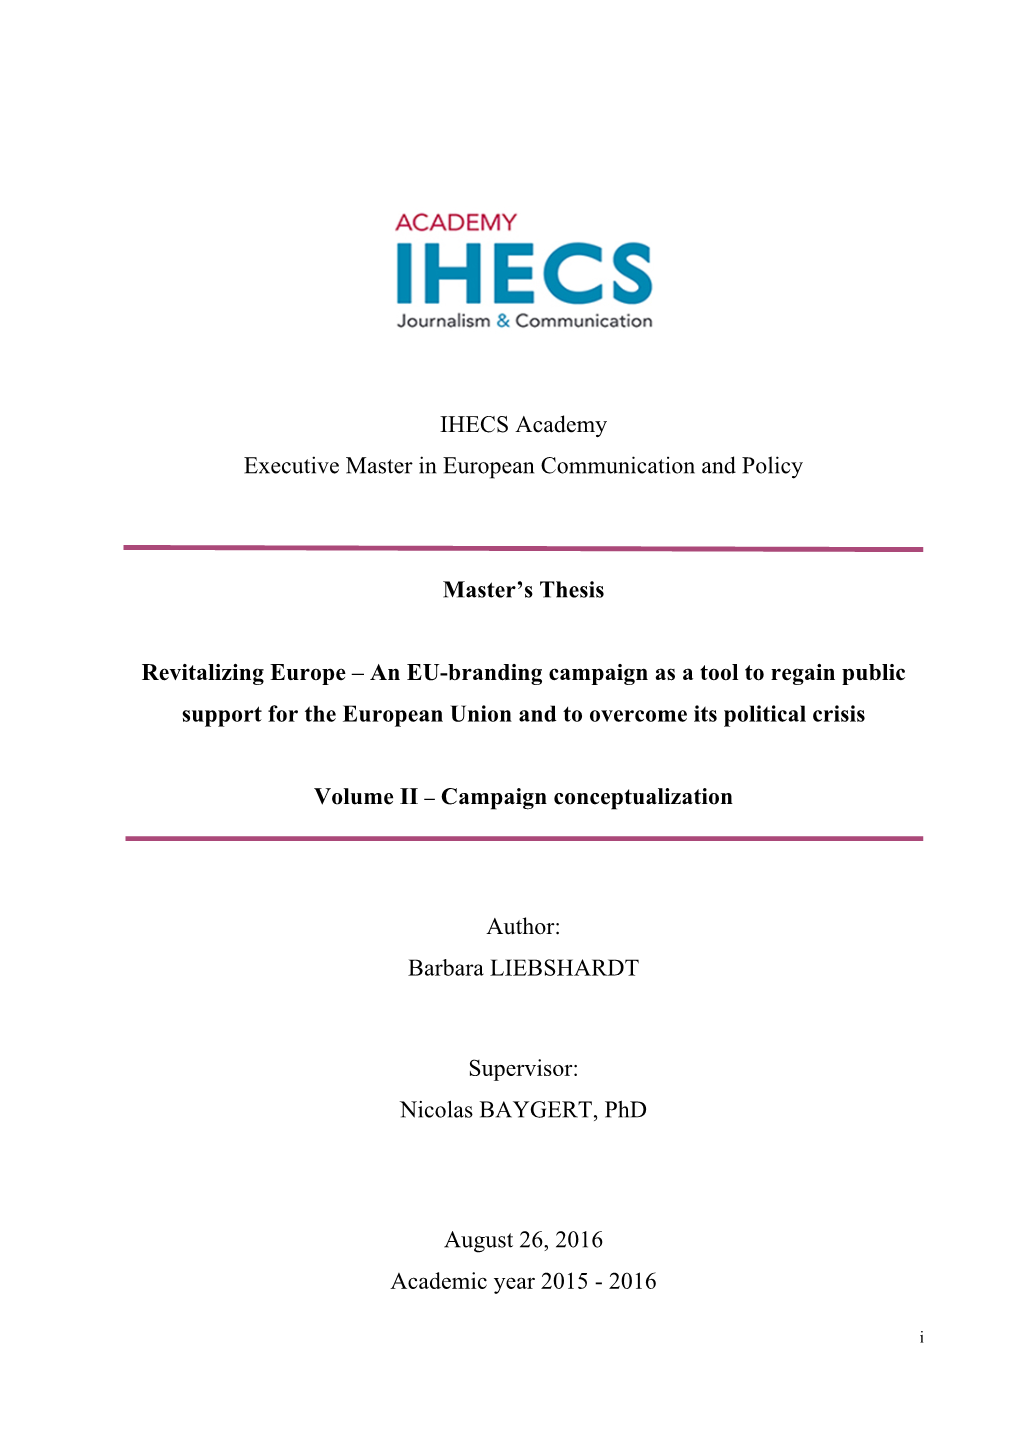 IHECS Academy Executive Master in European Communication and Policy